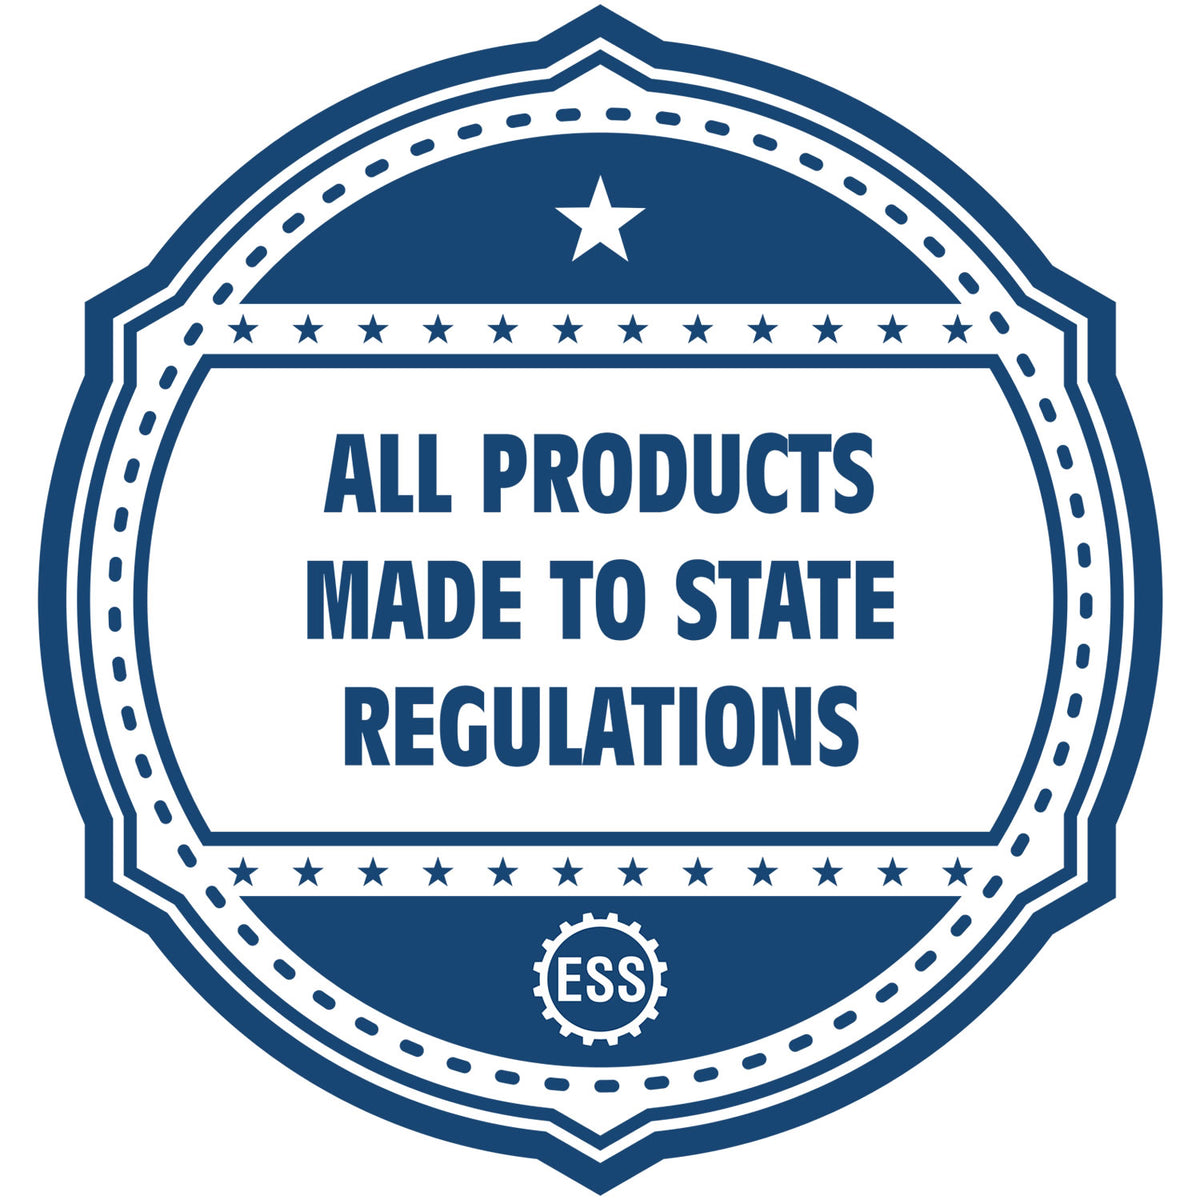 An icon or badge element for the Long Reach Georgia Land Surveyor Seal showing that this product is made in compliance with state regulations.